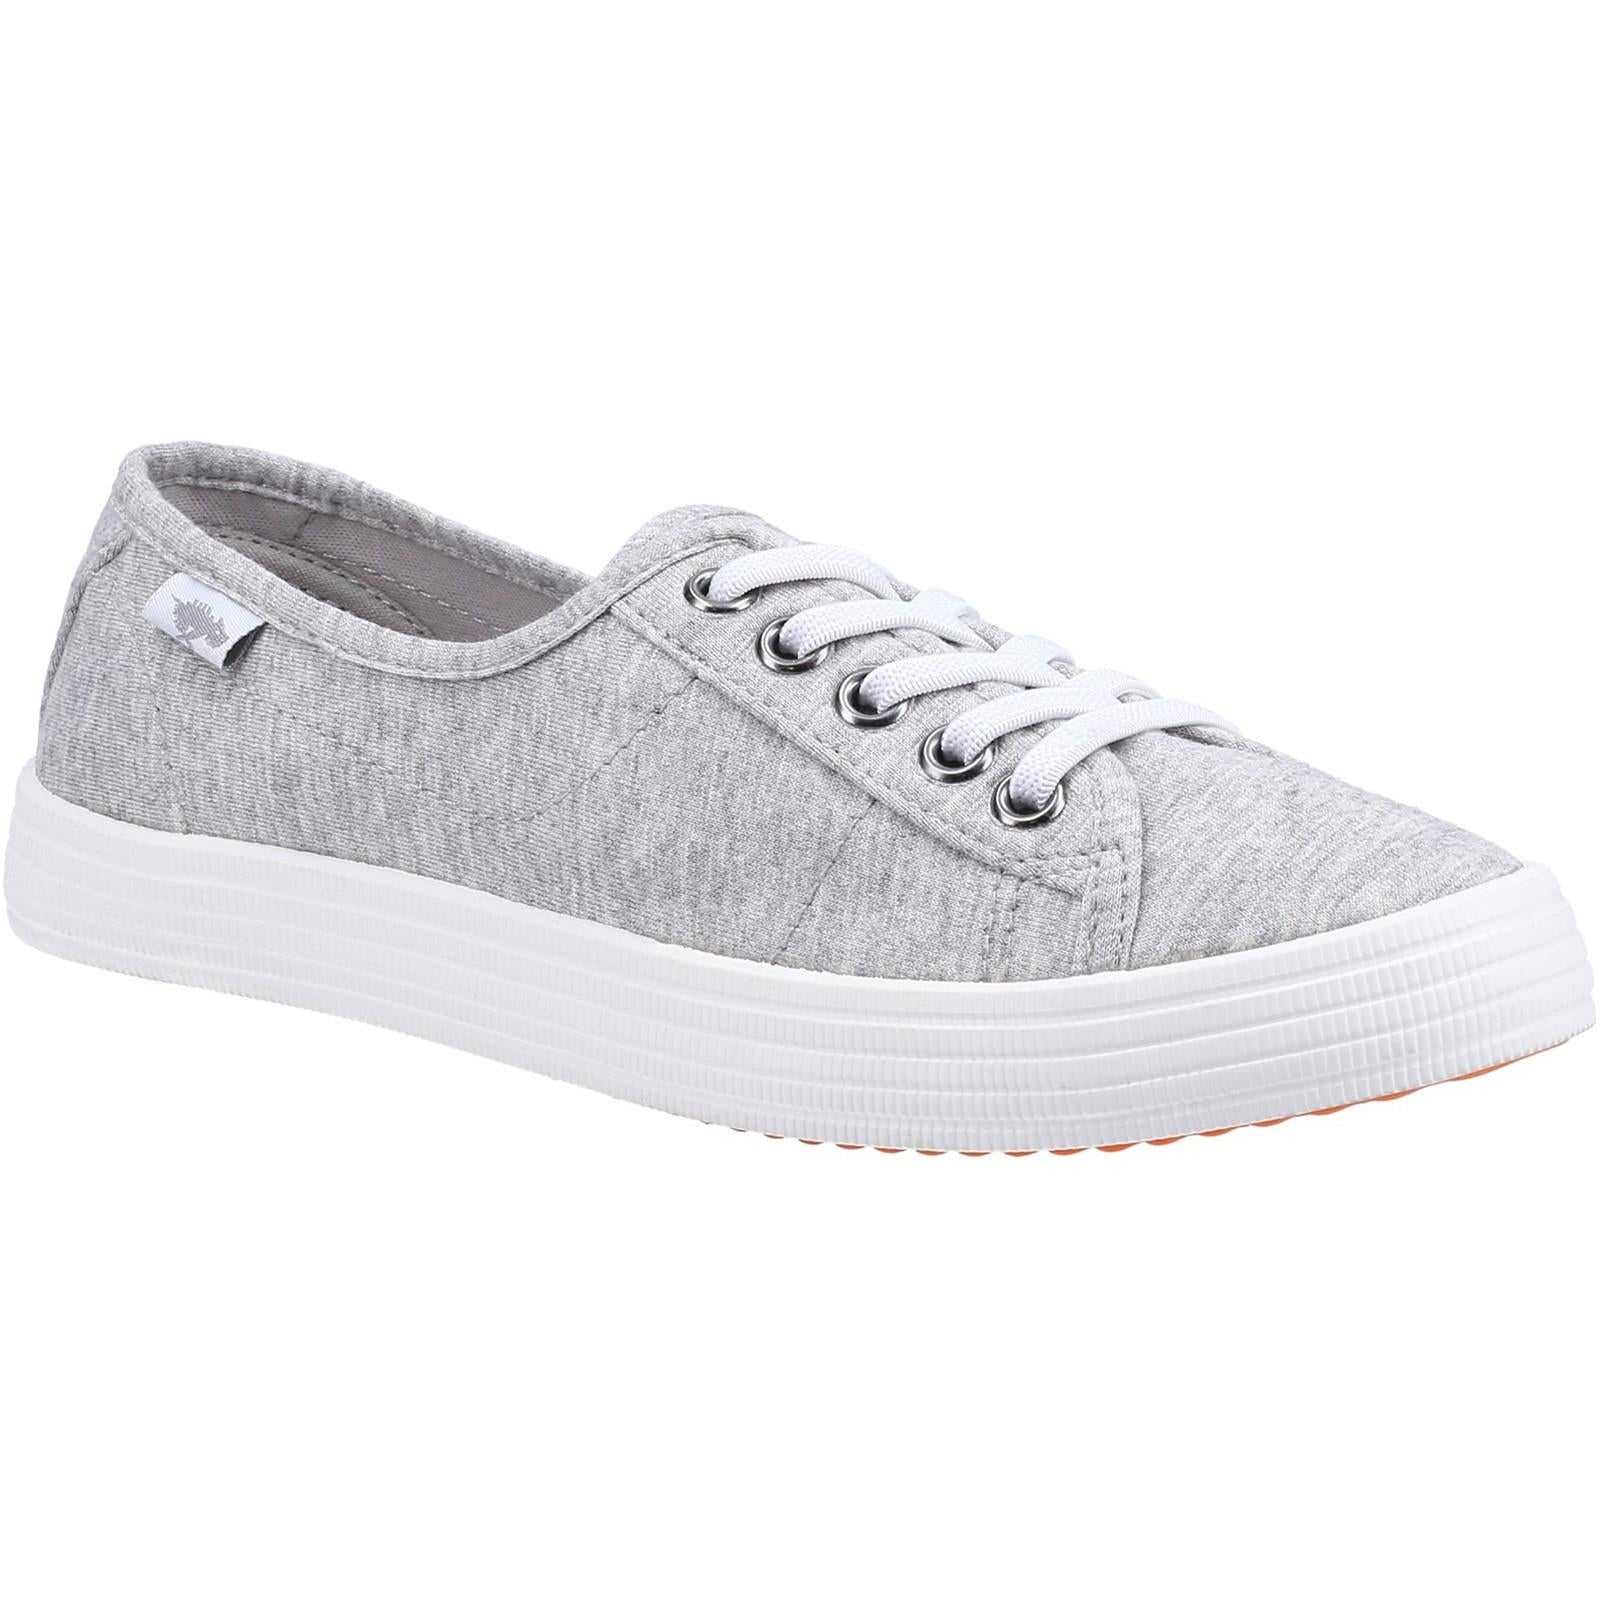 Rocket Dog Chow Chow Summer Jersey light grey ladies plimsoll trainers shoes